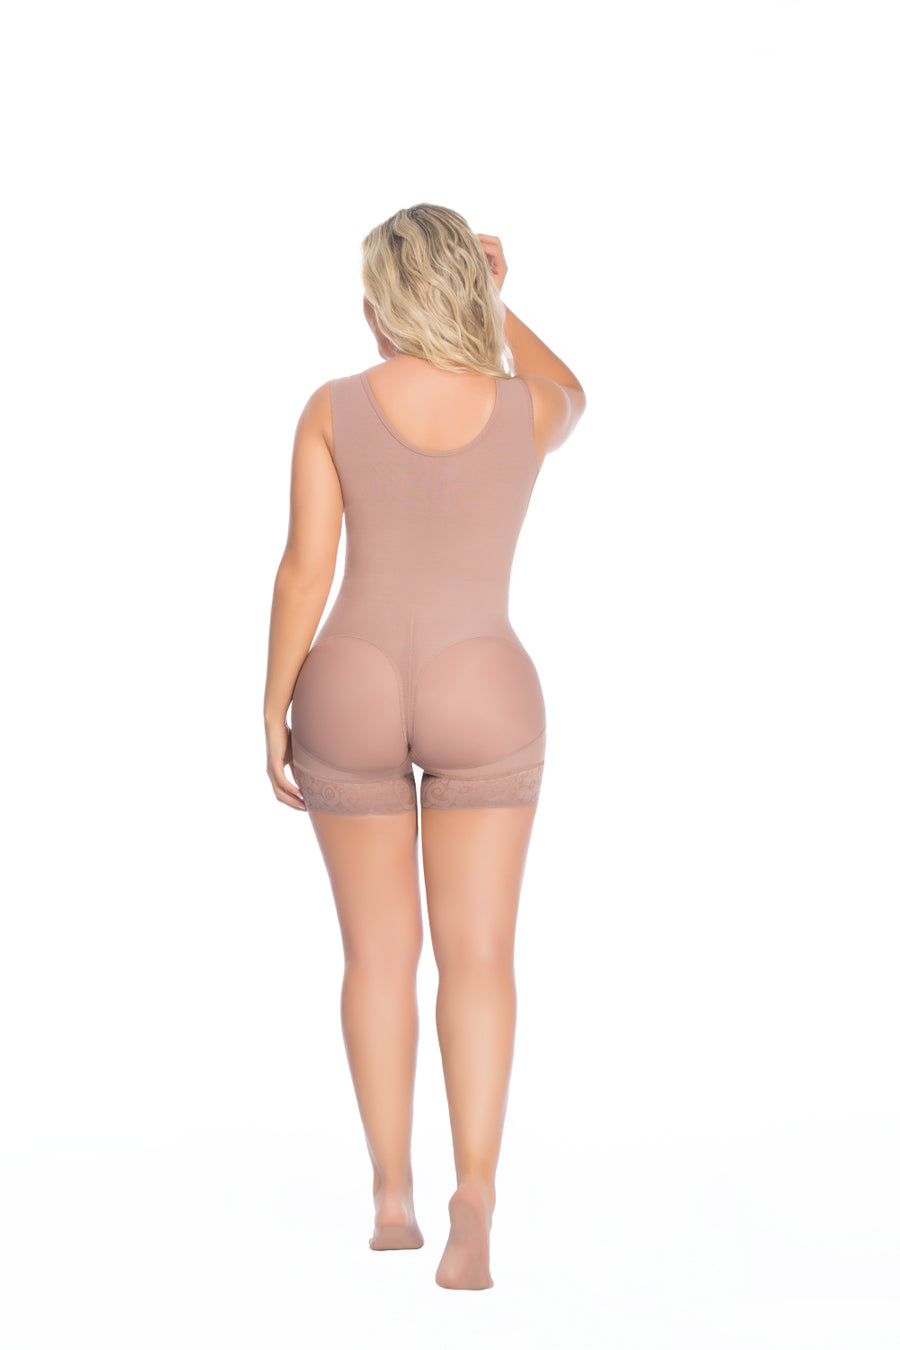 Colombian Bodyshapers -Waist Trainers - Girdles – SHAPERS